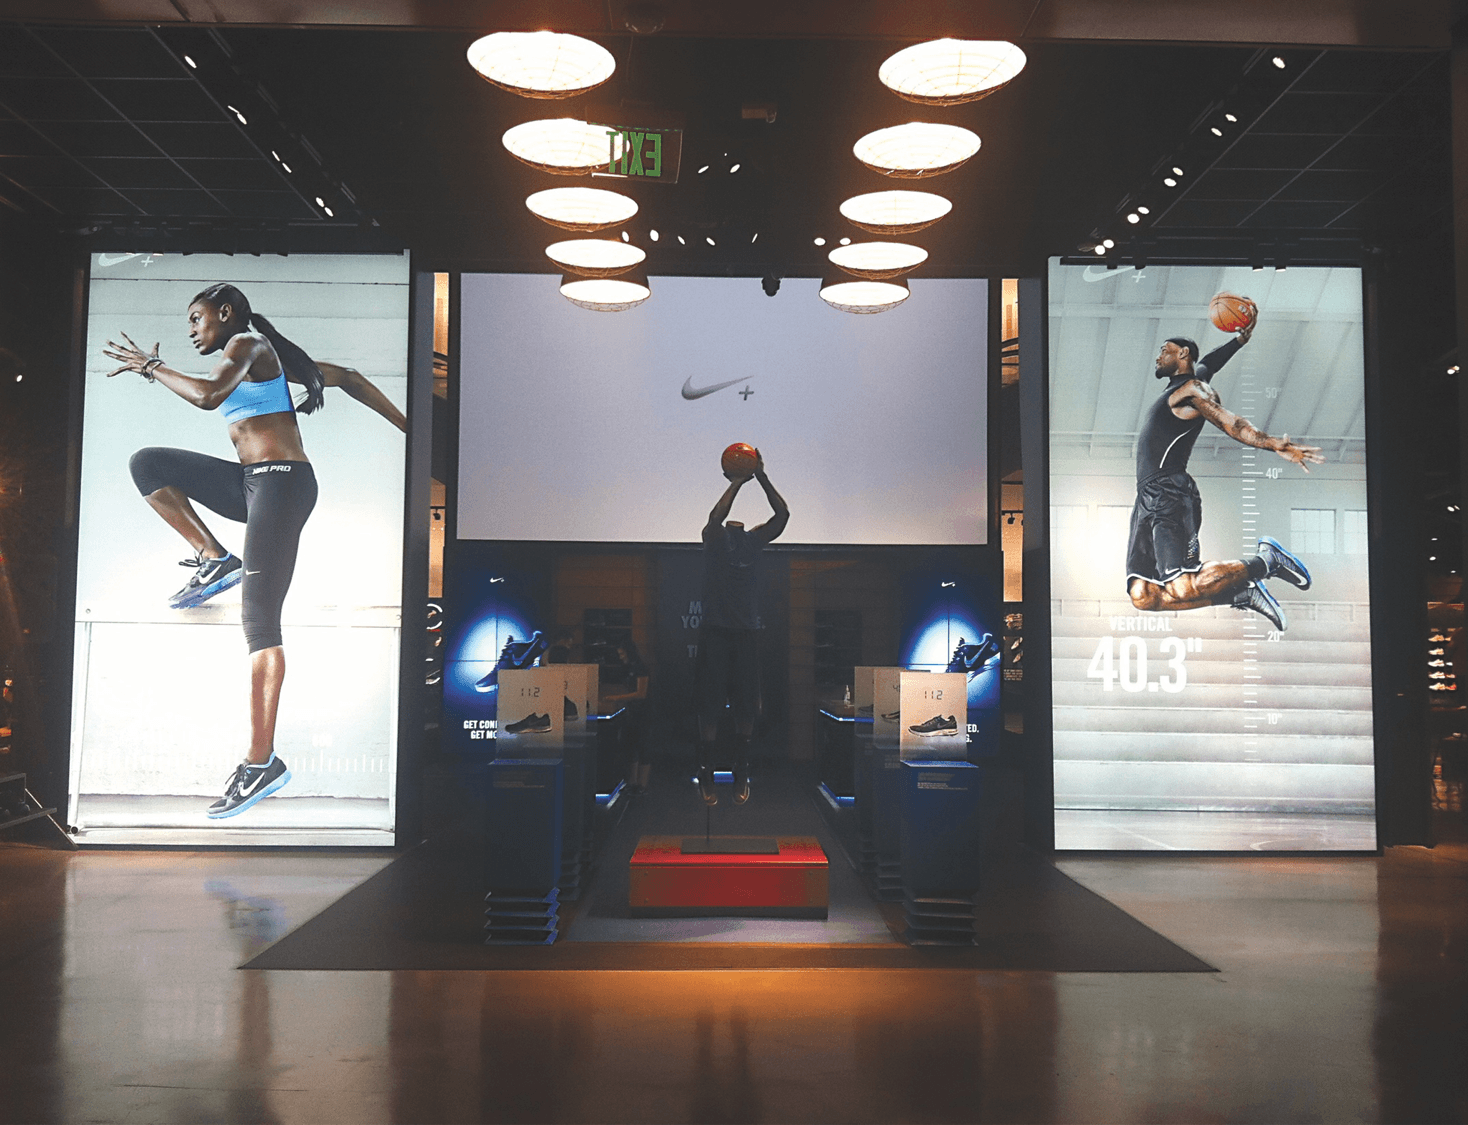 Nike’s Innovation Space